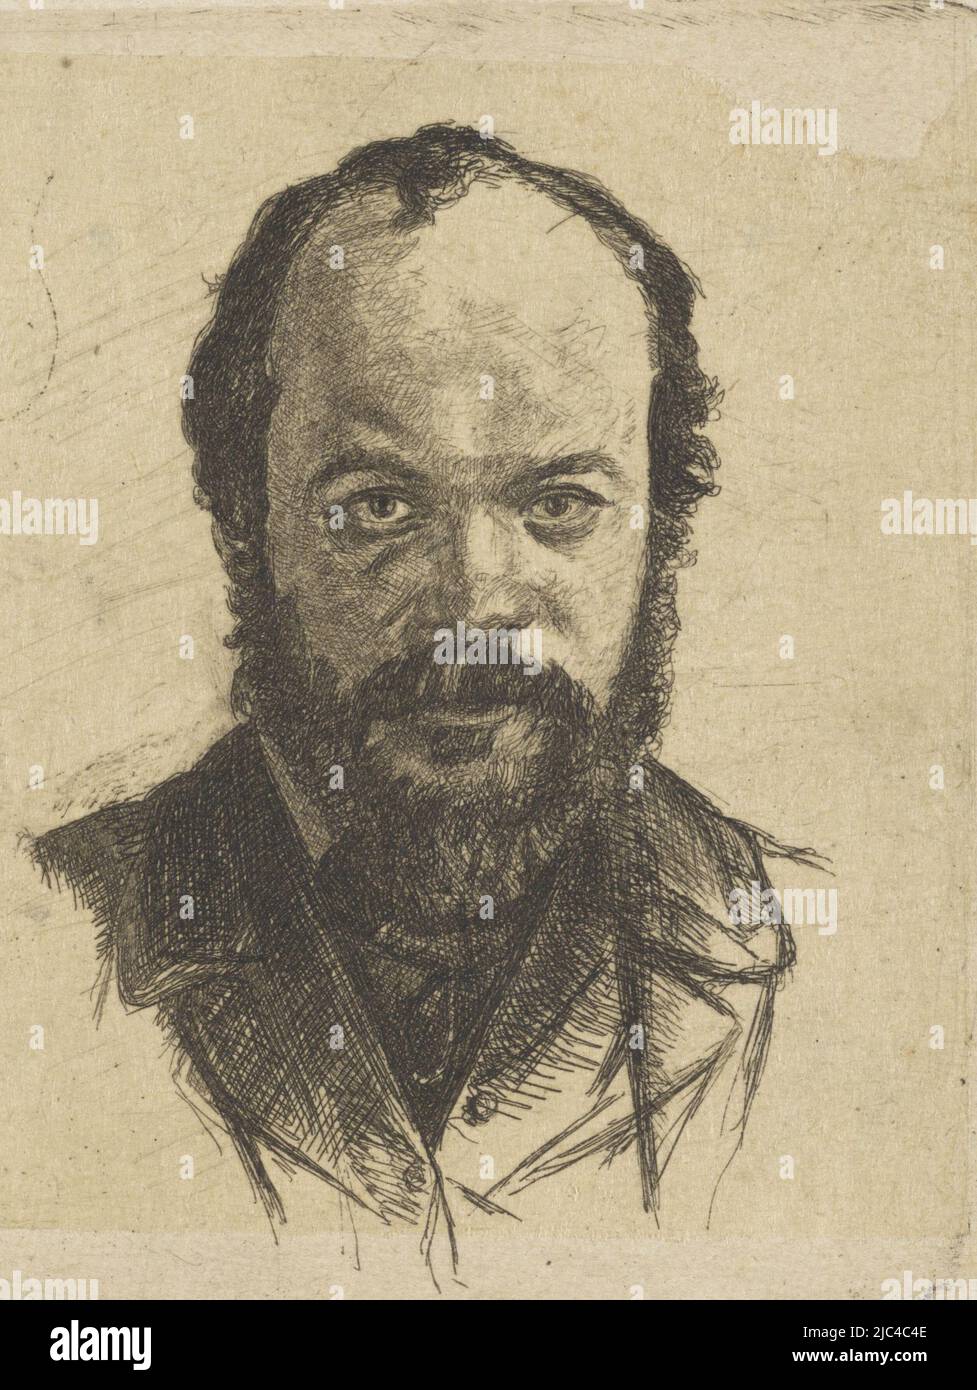 Portrait of the artist Jan Weissenbruch, older brother and teacher of the producing artist., Portrait of Jan Weissenbruch, print maker: Frederik Hendrik Weissenbruch, The Hague, 1863, paper, etching, h 88 mm × w 140 mm Stock Photo